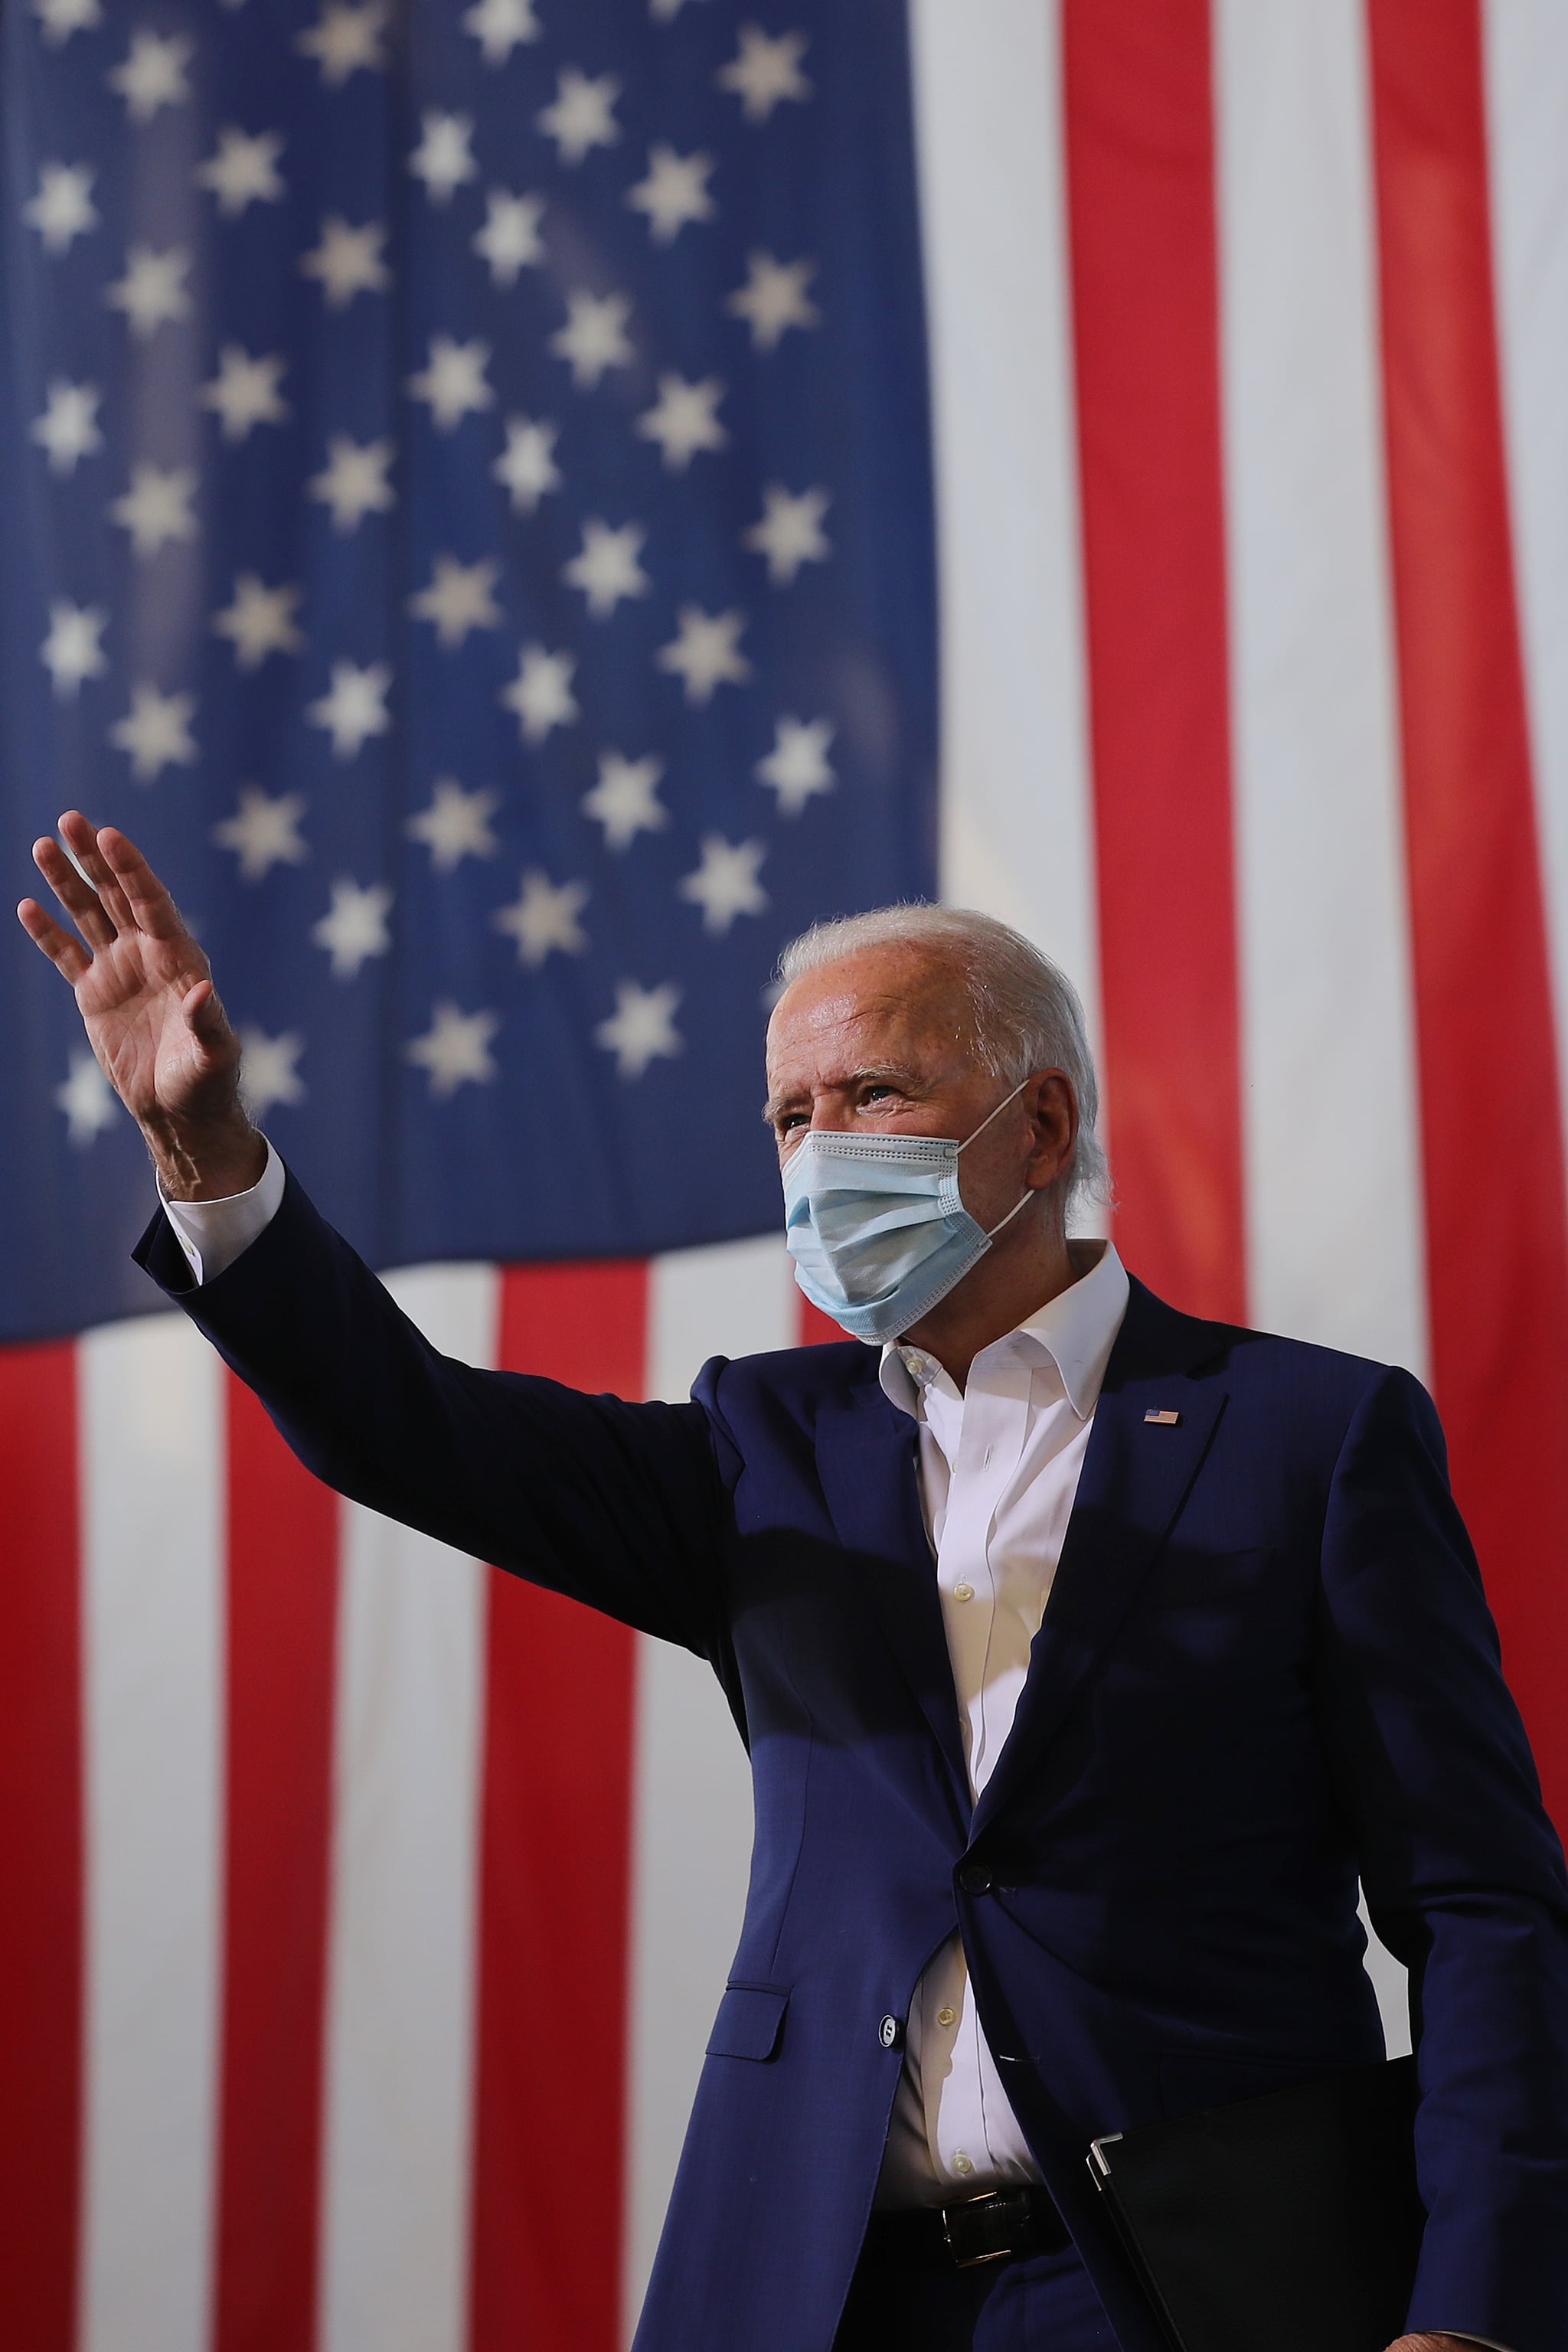 MIRAMAR, FLORIDA - OCTOBER 13: Wearing a face mask to reduce the risk posed by the coronavirus, Democratic presidential nominee Joe Biden waves to supporters during a drive-in voter mobilization event at Miramar Regional Park October 13, 2020 in Miramar, Florida. With three weeks until Election Day, Biden is campaigning in Florida. (Photo by Chip Somodevilla/Getty Images)